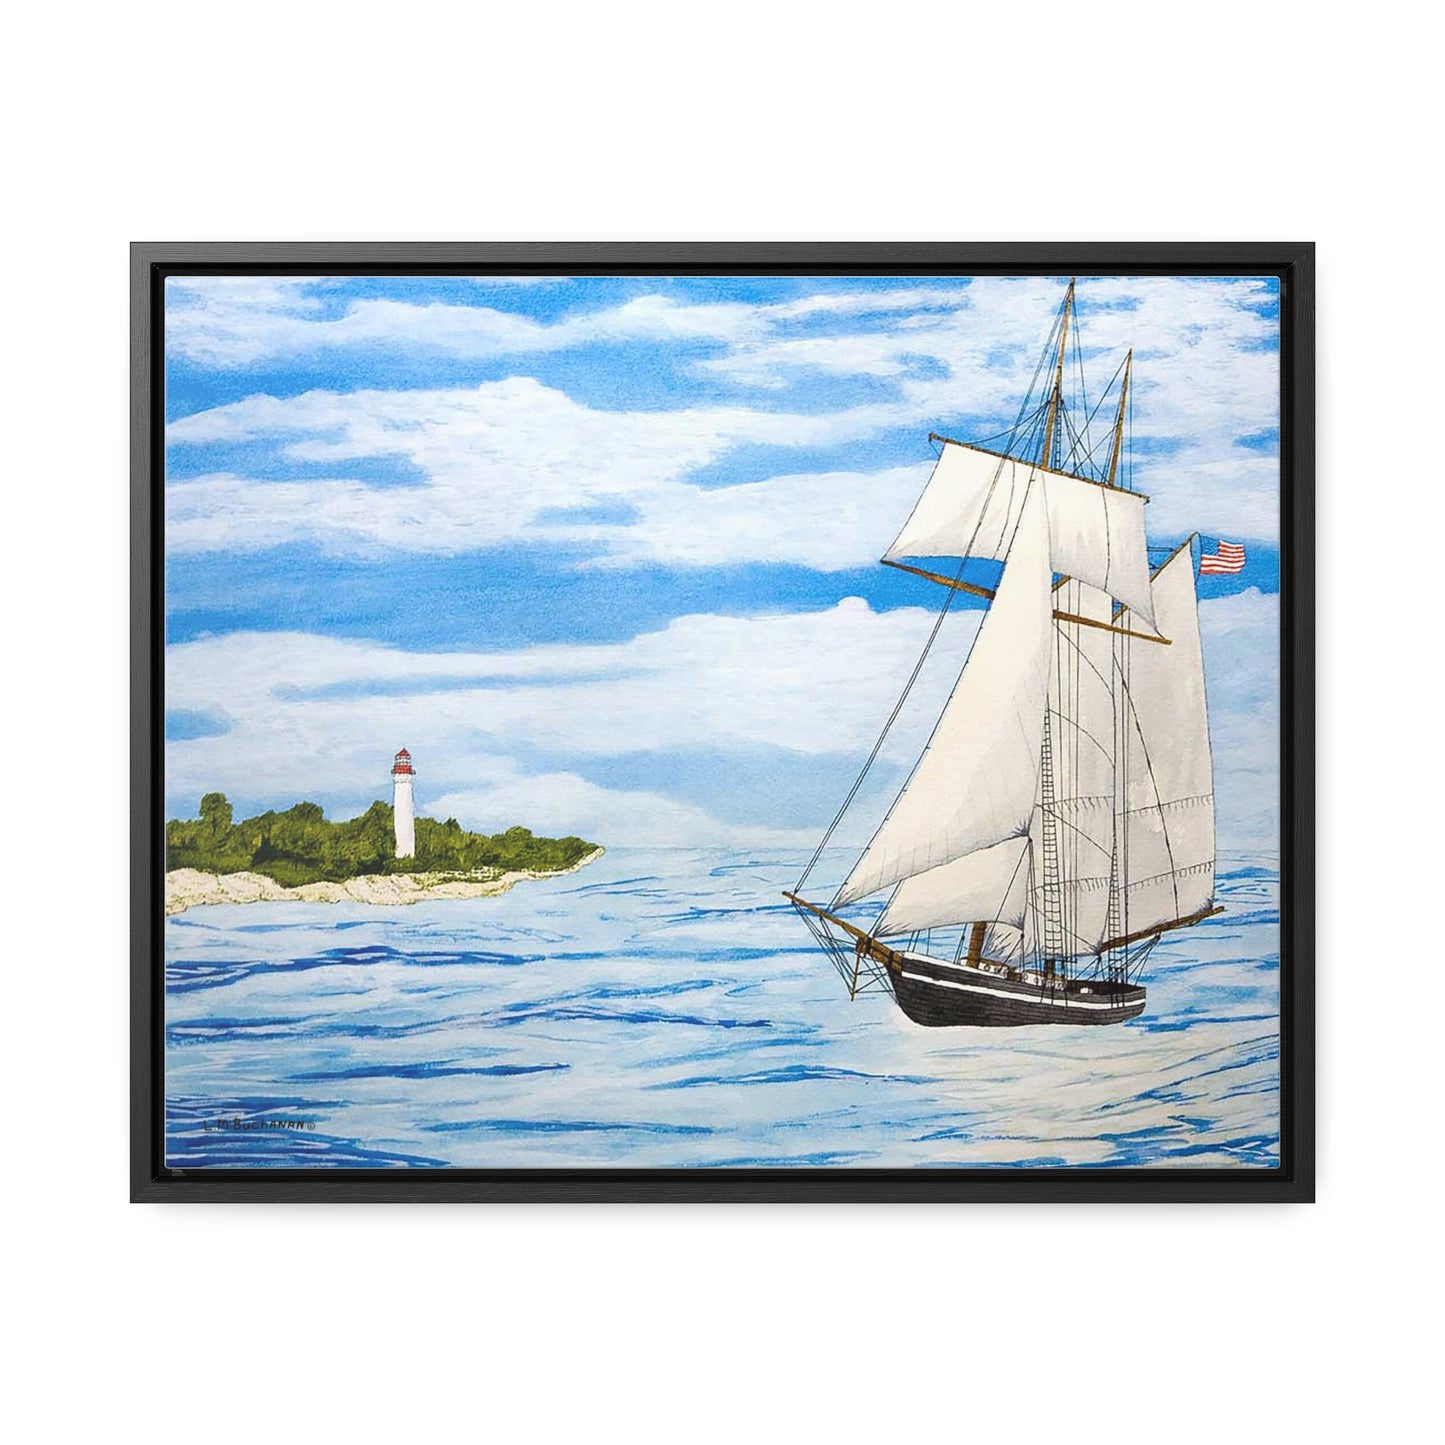 Pleasant Breeze Off Cape May features a small topsail schooner as it enters the Delaware Bay and rounds the point in view of the Cape May, New Jersey Lighthouse. The canvas wrap is a reproduction of an original watercolor by Lee M. Buchanan .